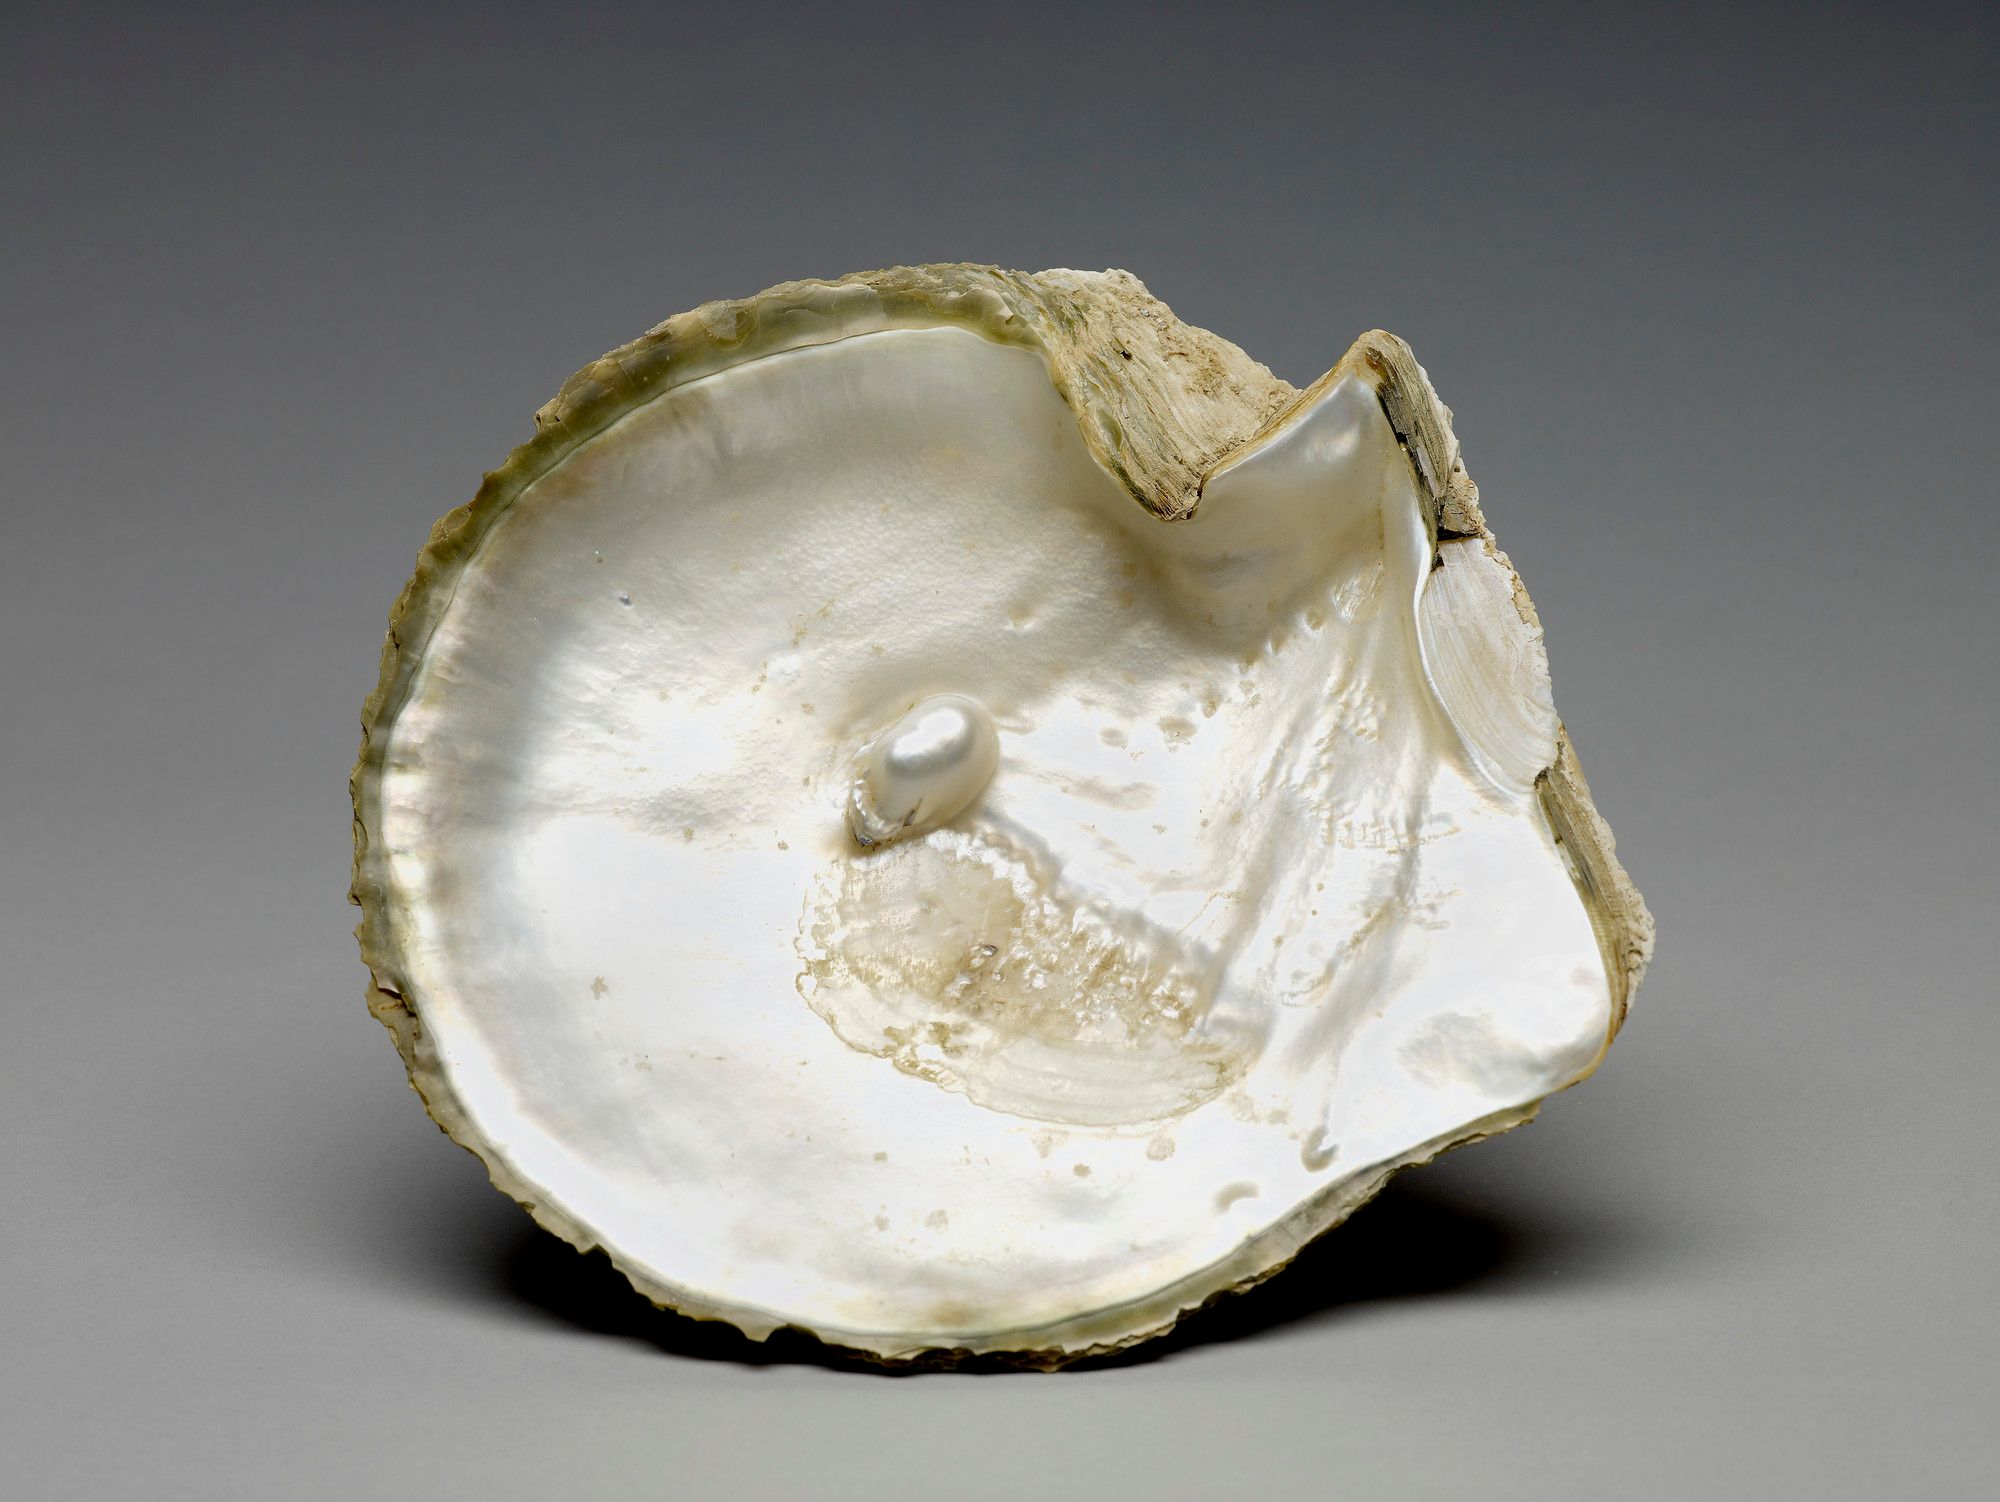 oyster shell with embedded pearl given to Queen Elizabeth II by the National Museum of Doha, Qatar, Arabian Gulf during her State Vsit to Qatar, 21st-24th February 1979 in the Royal Collection